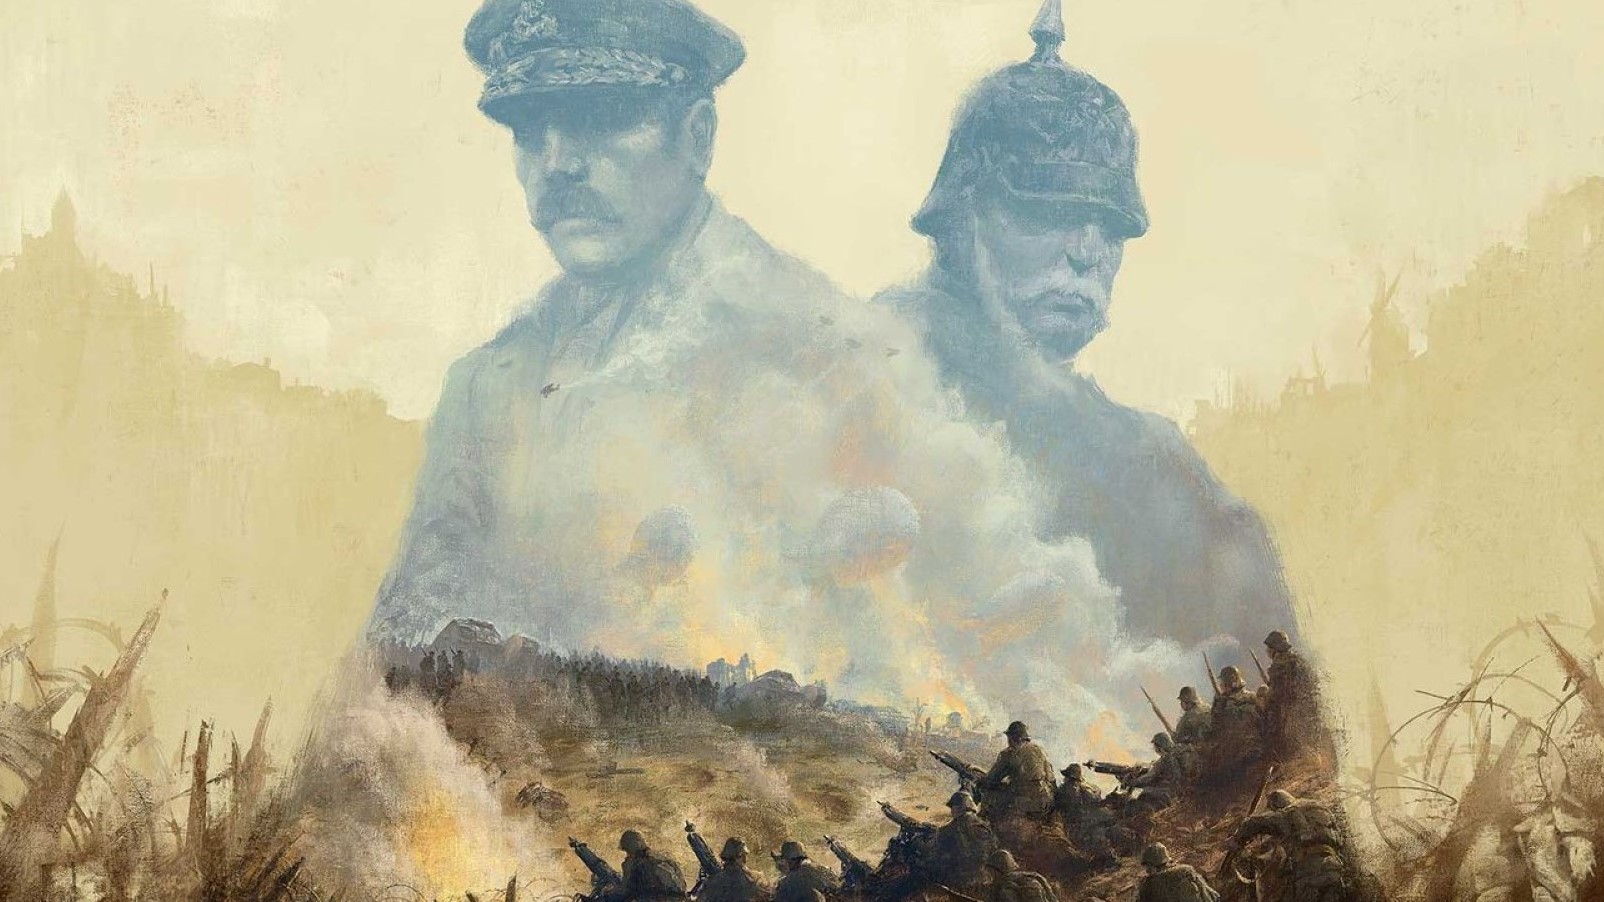  The Great War is a filmic RTS that aims to match the brutality of World War 1 